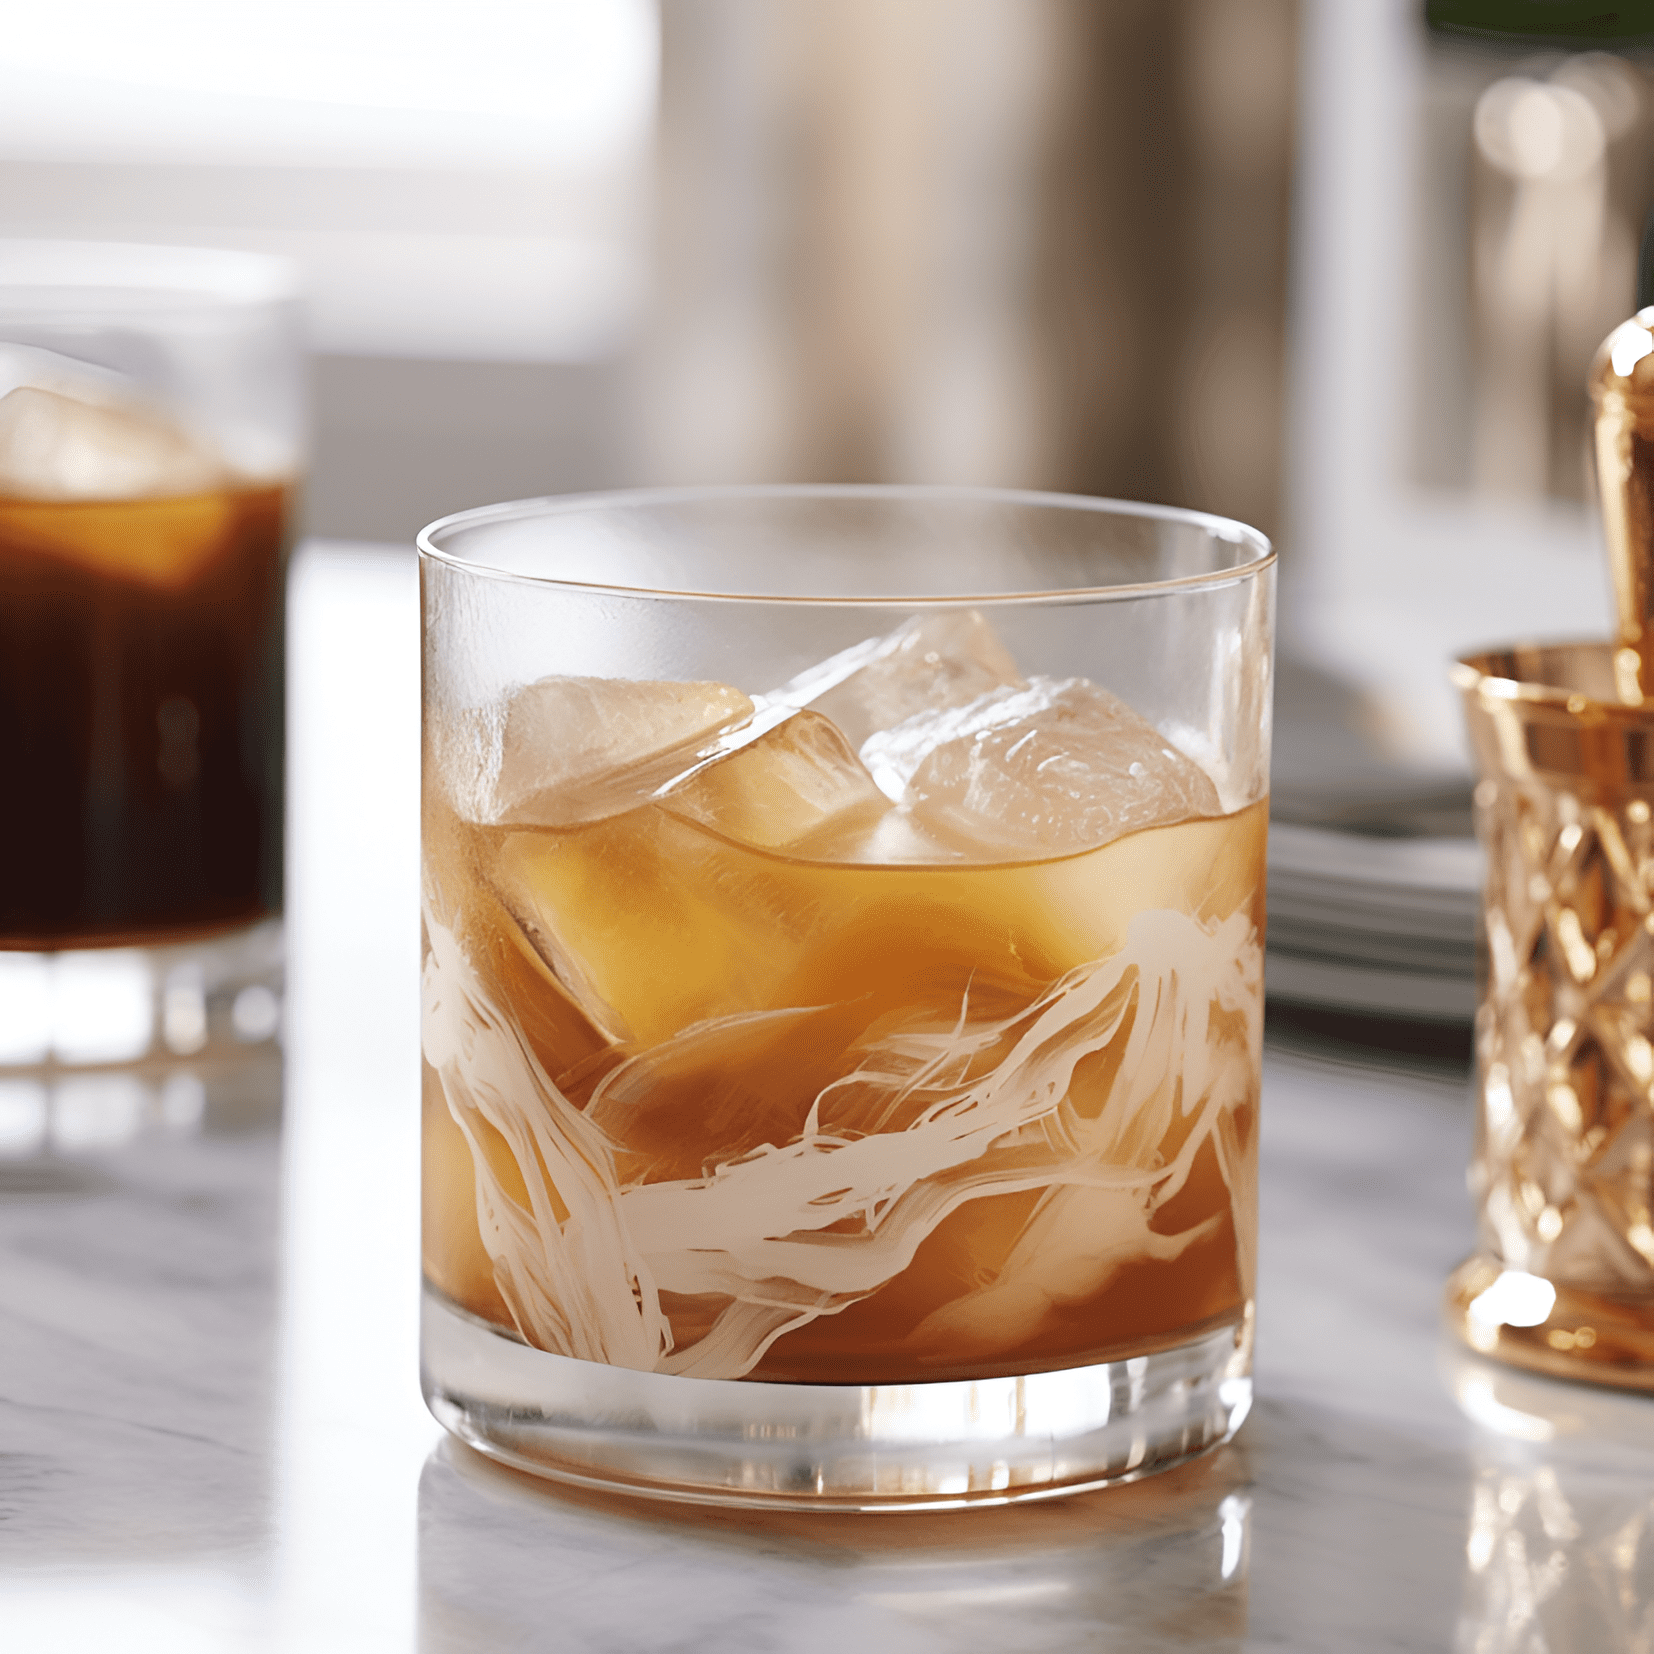 Toasted Almond Cocktail Recipe - The Toasted Almond cocktail is a sweet, creamy, and nutty drink with a rich and velvety texture. The combination of amaretto and coffee liqueur creates a delightful balance of flavors, while the addition of cream adds a luxurious and indulgent mouthfeel.